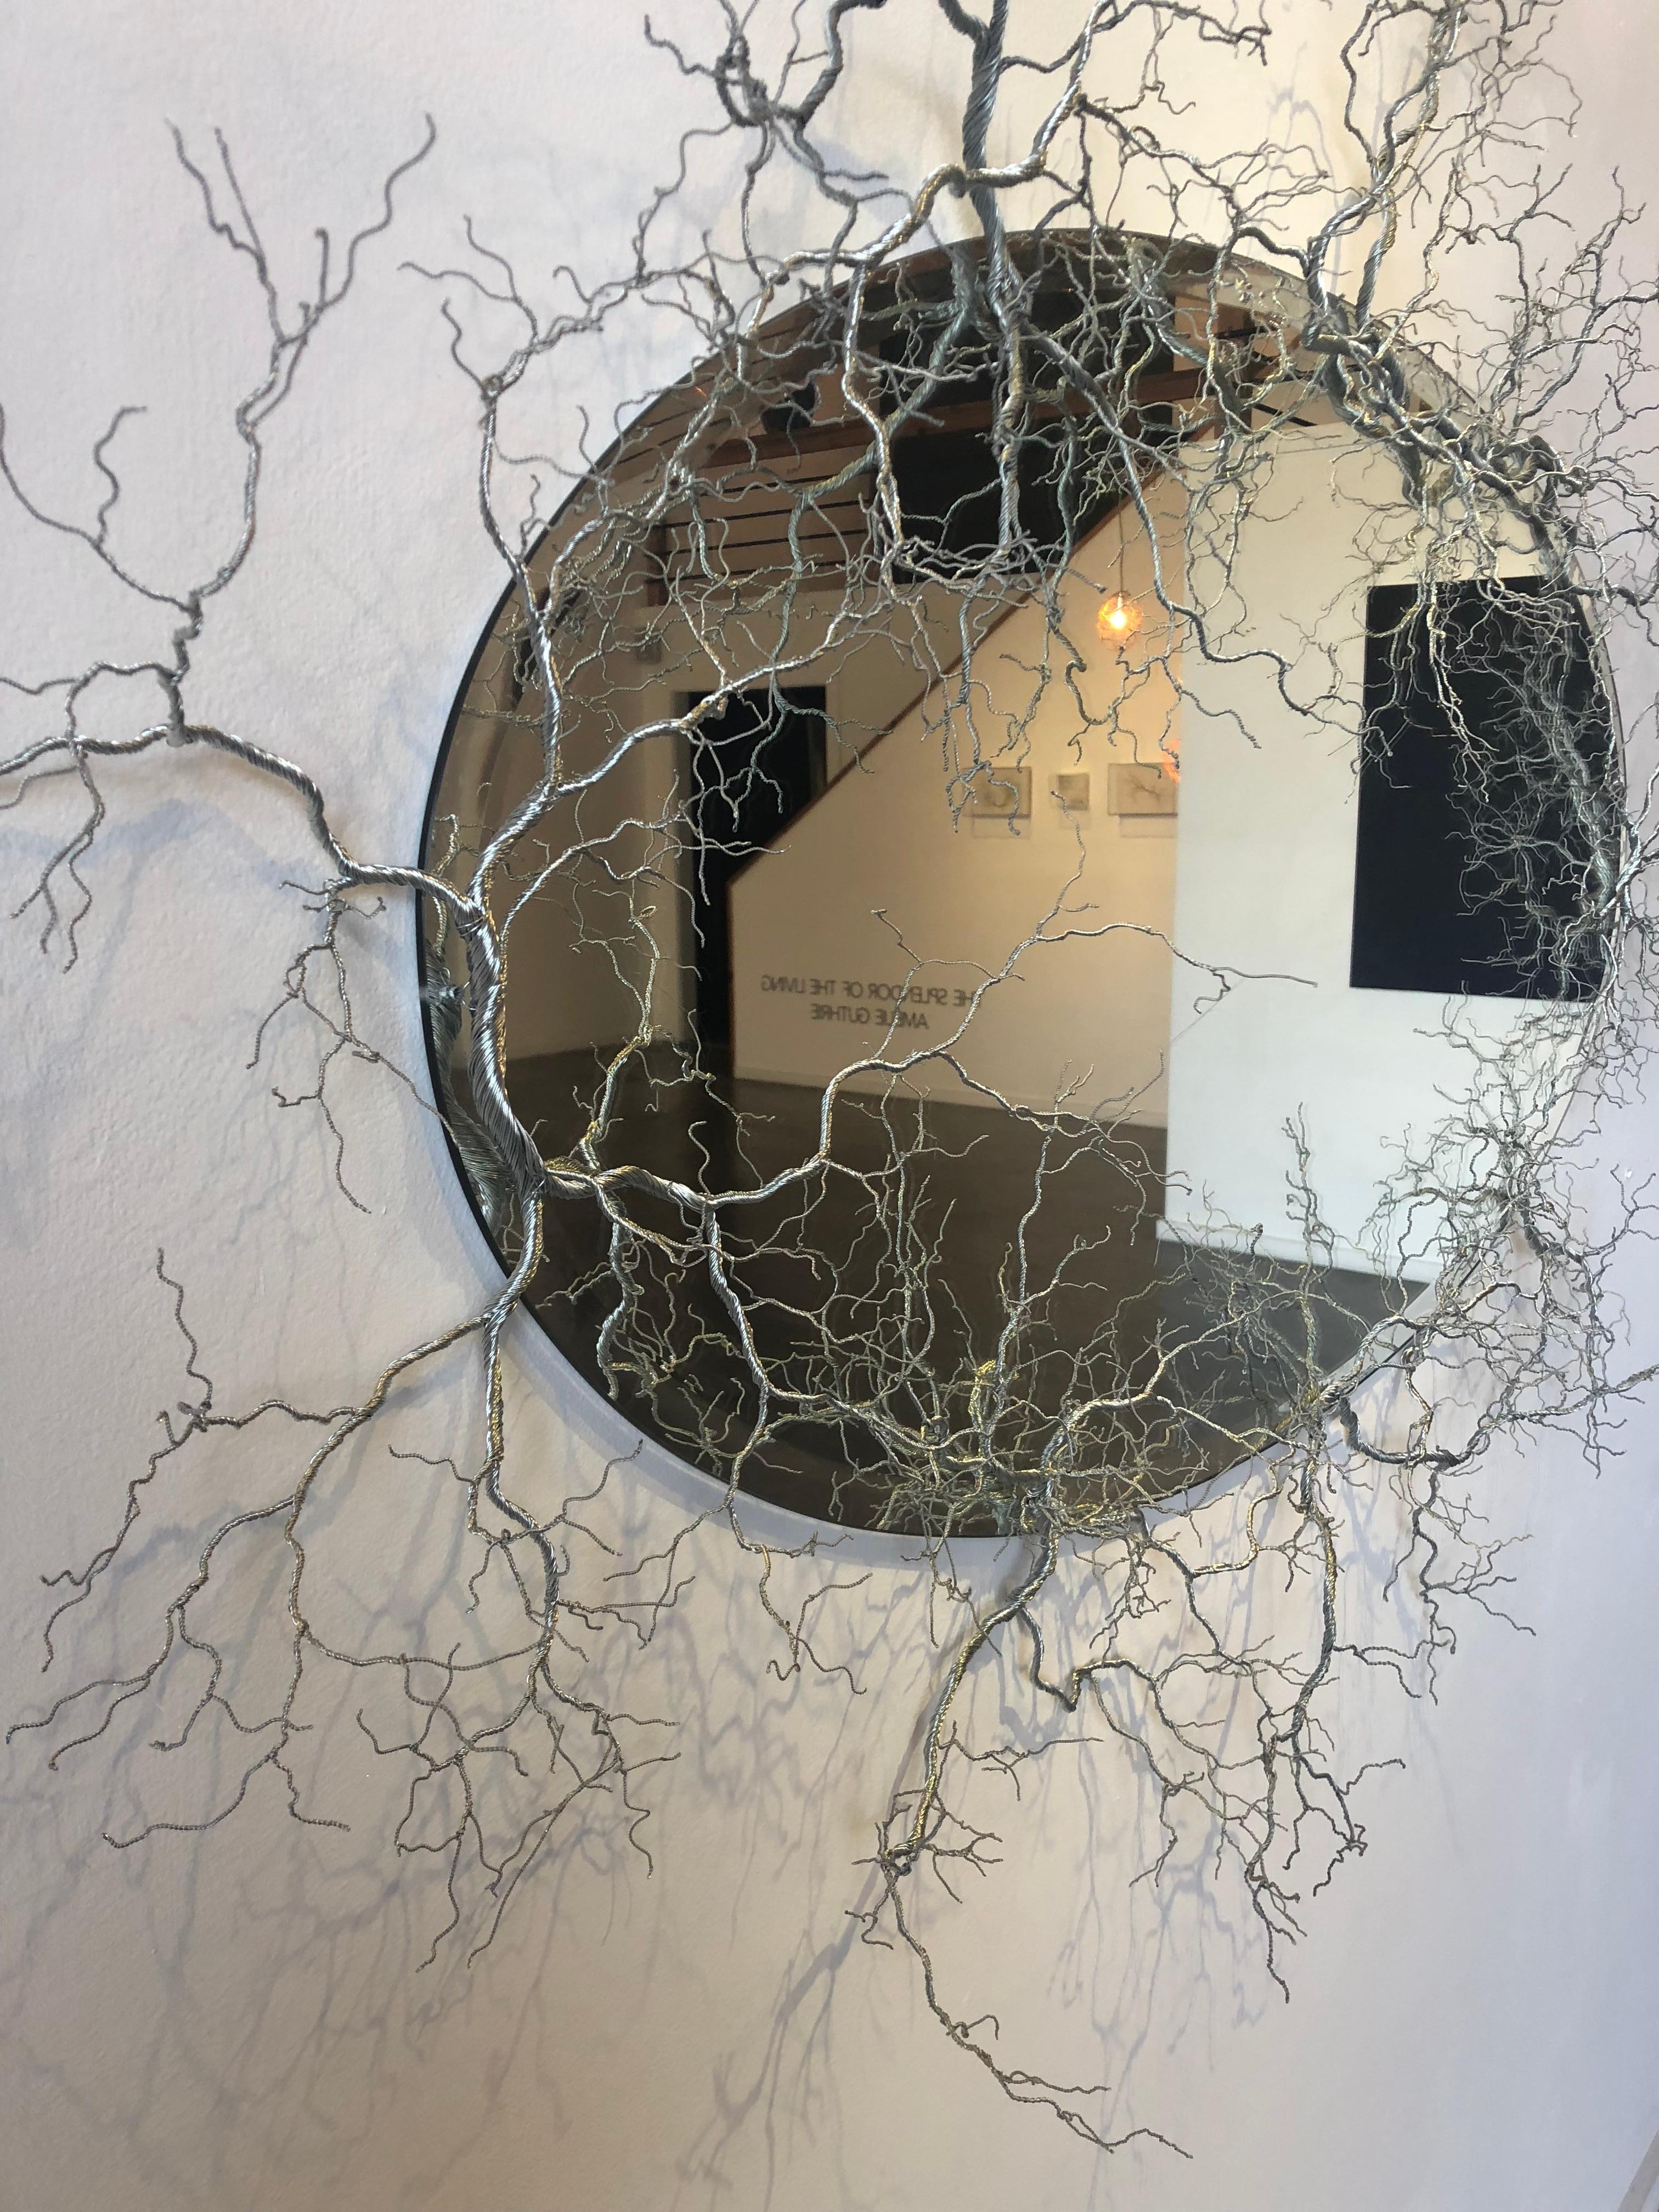 Large fine art wire metal sculpture of tree branches surrounding an oval mirror.

Amélie Guthrie grew up in New Orleans before studying art history at Vanderbilt University. Thereafter, her adoration for art continued to flourish, and she worked in